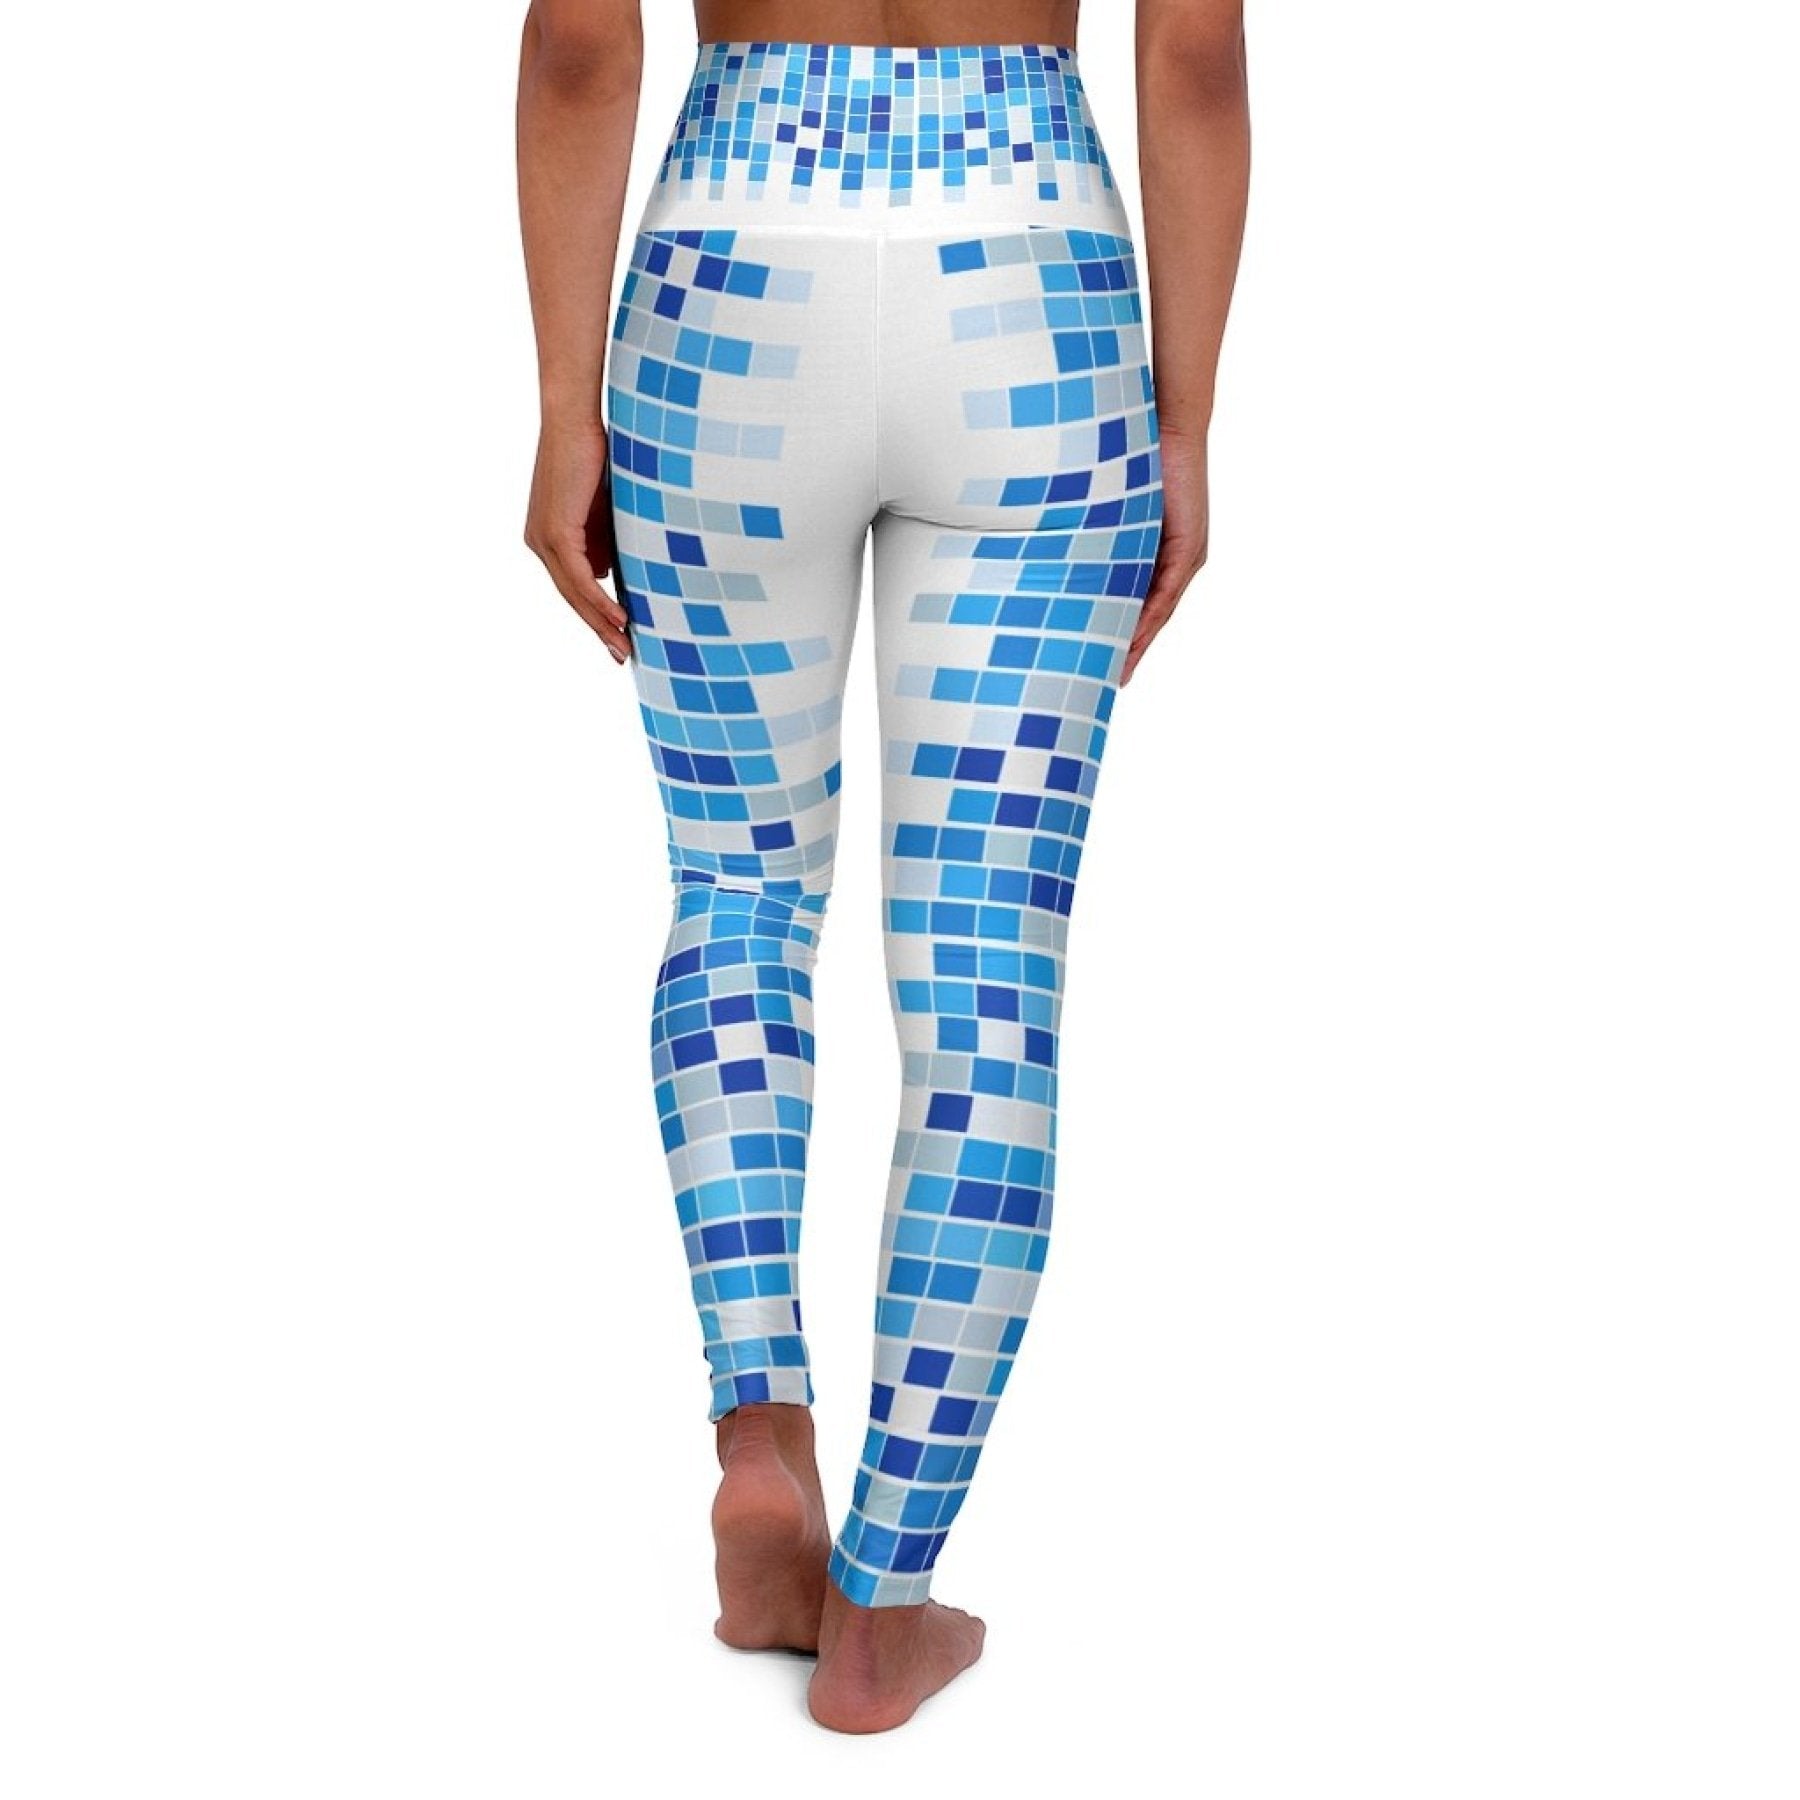 High Waisted Yoga Leggings, Blue And White Mosaic Square Style Pants